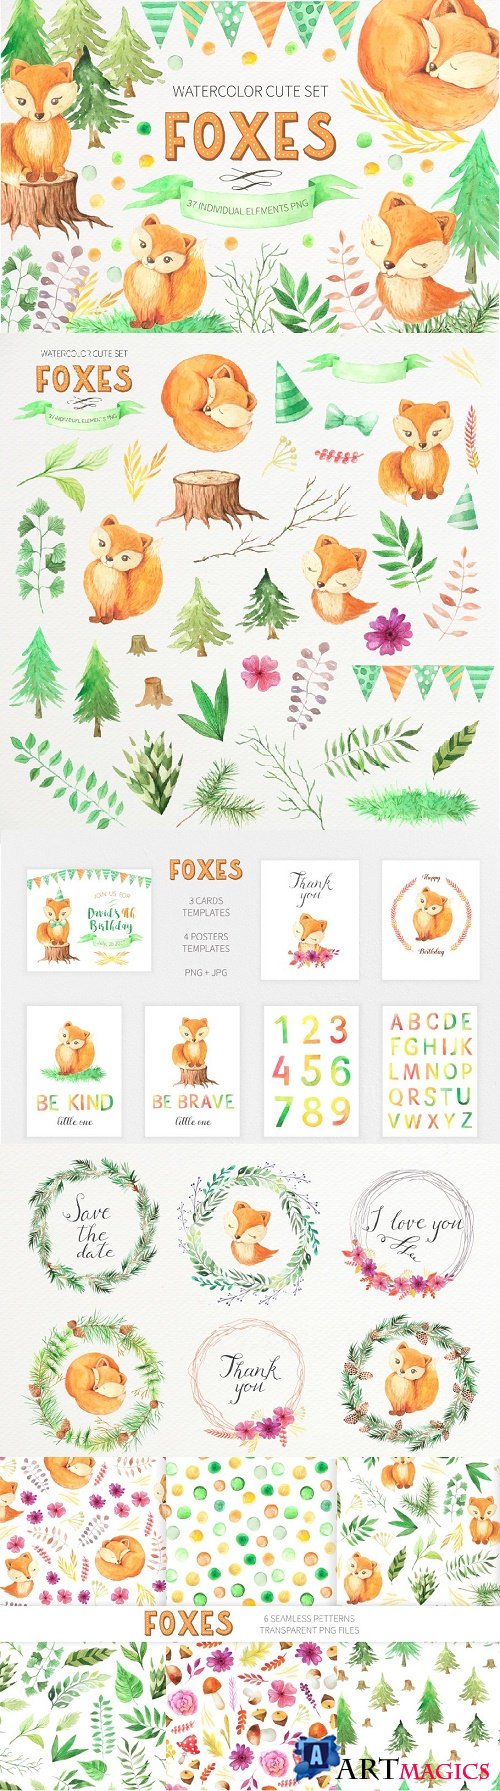 Watercolor Cute Foxes and Floral Set - 1638019